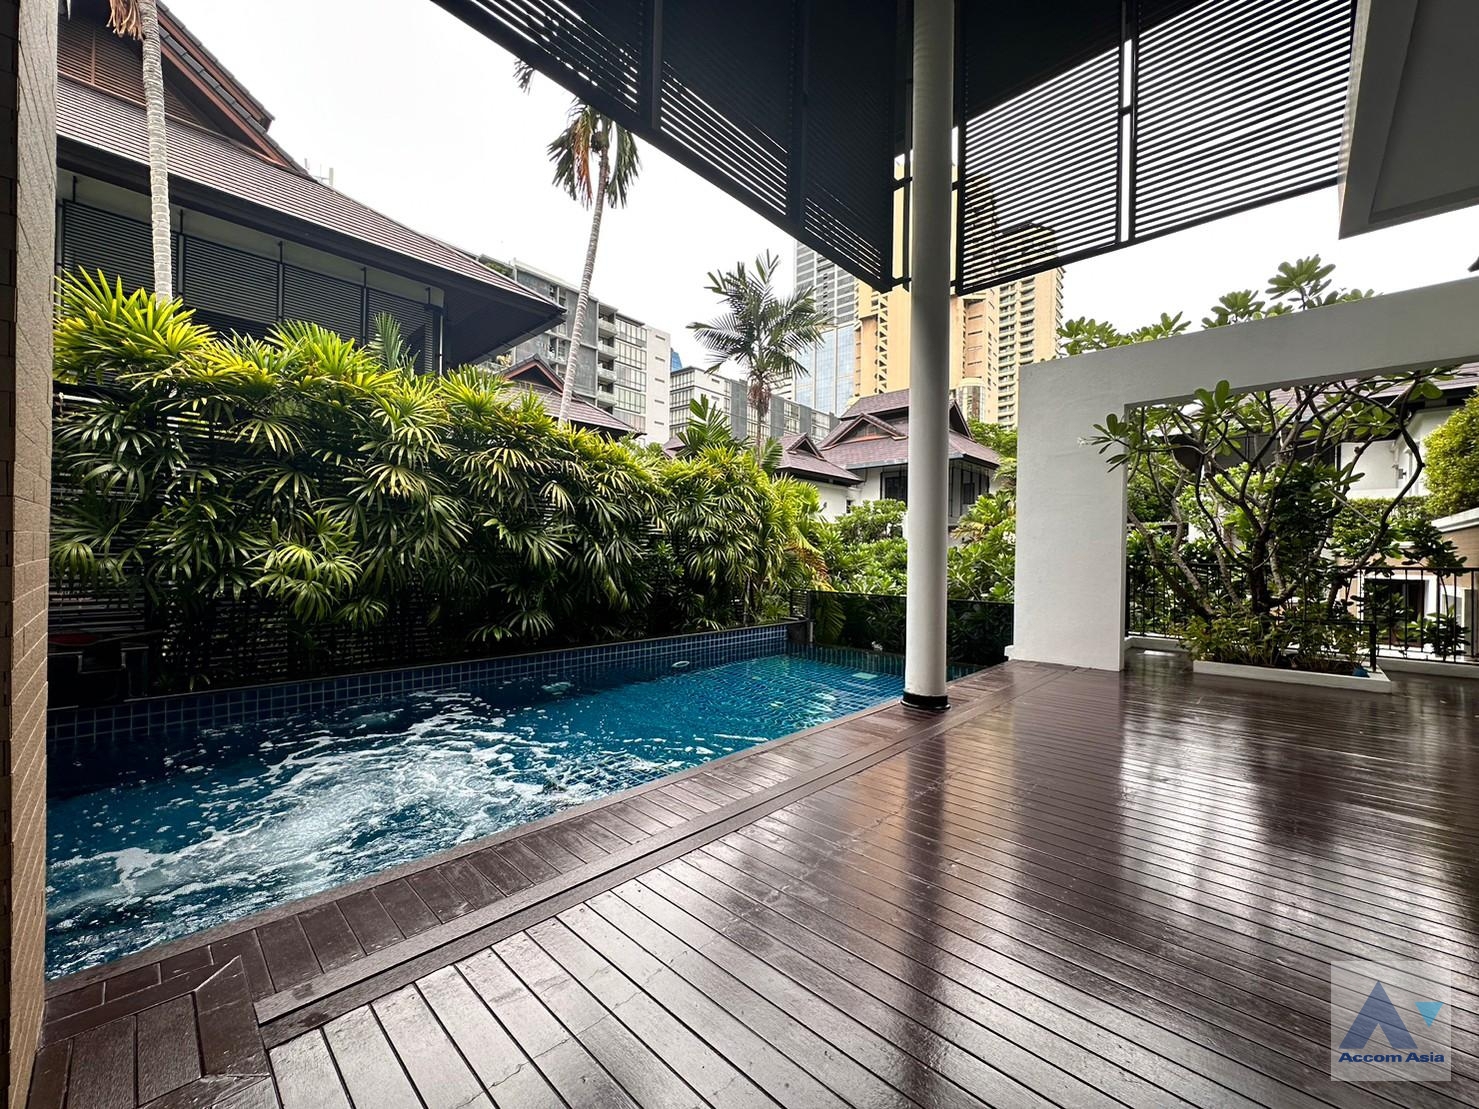 Private Swimming Pool |  House with pool Exclusive compound House  4 Bedroom for Rent MRT Sukhumvit in Sukhumvit Bangkok